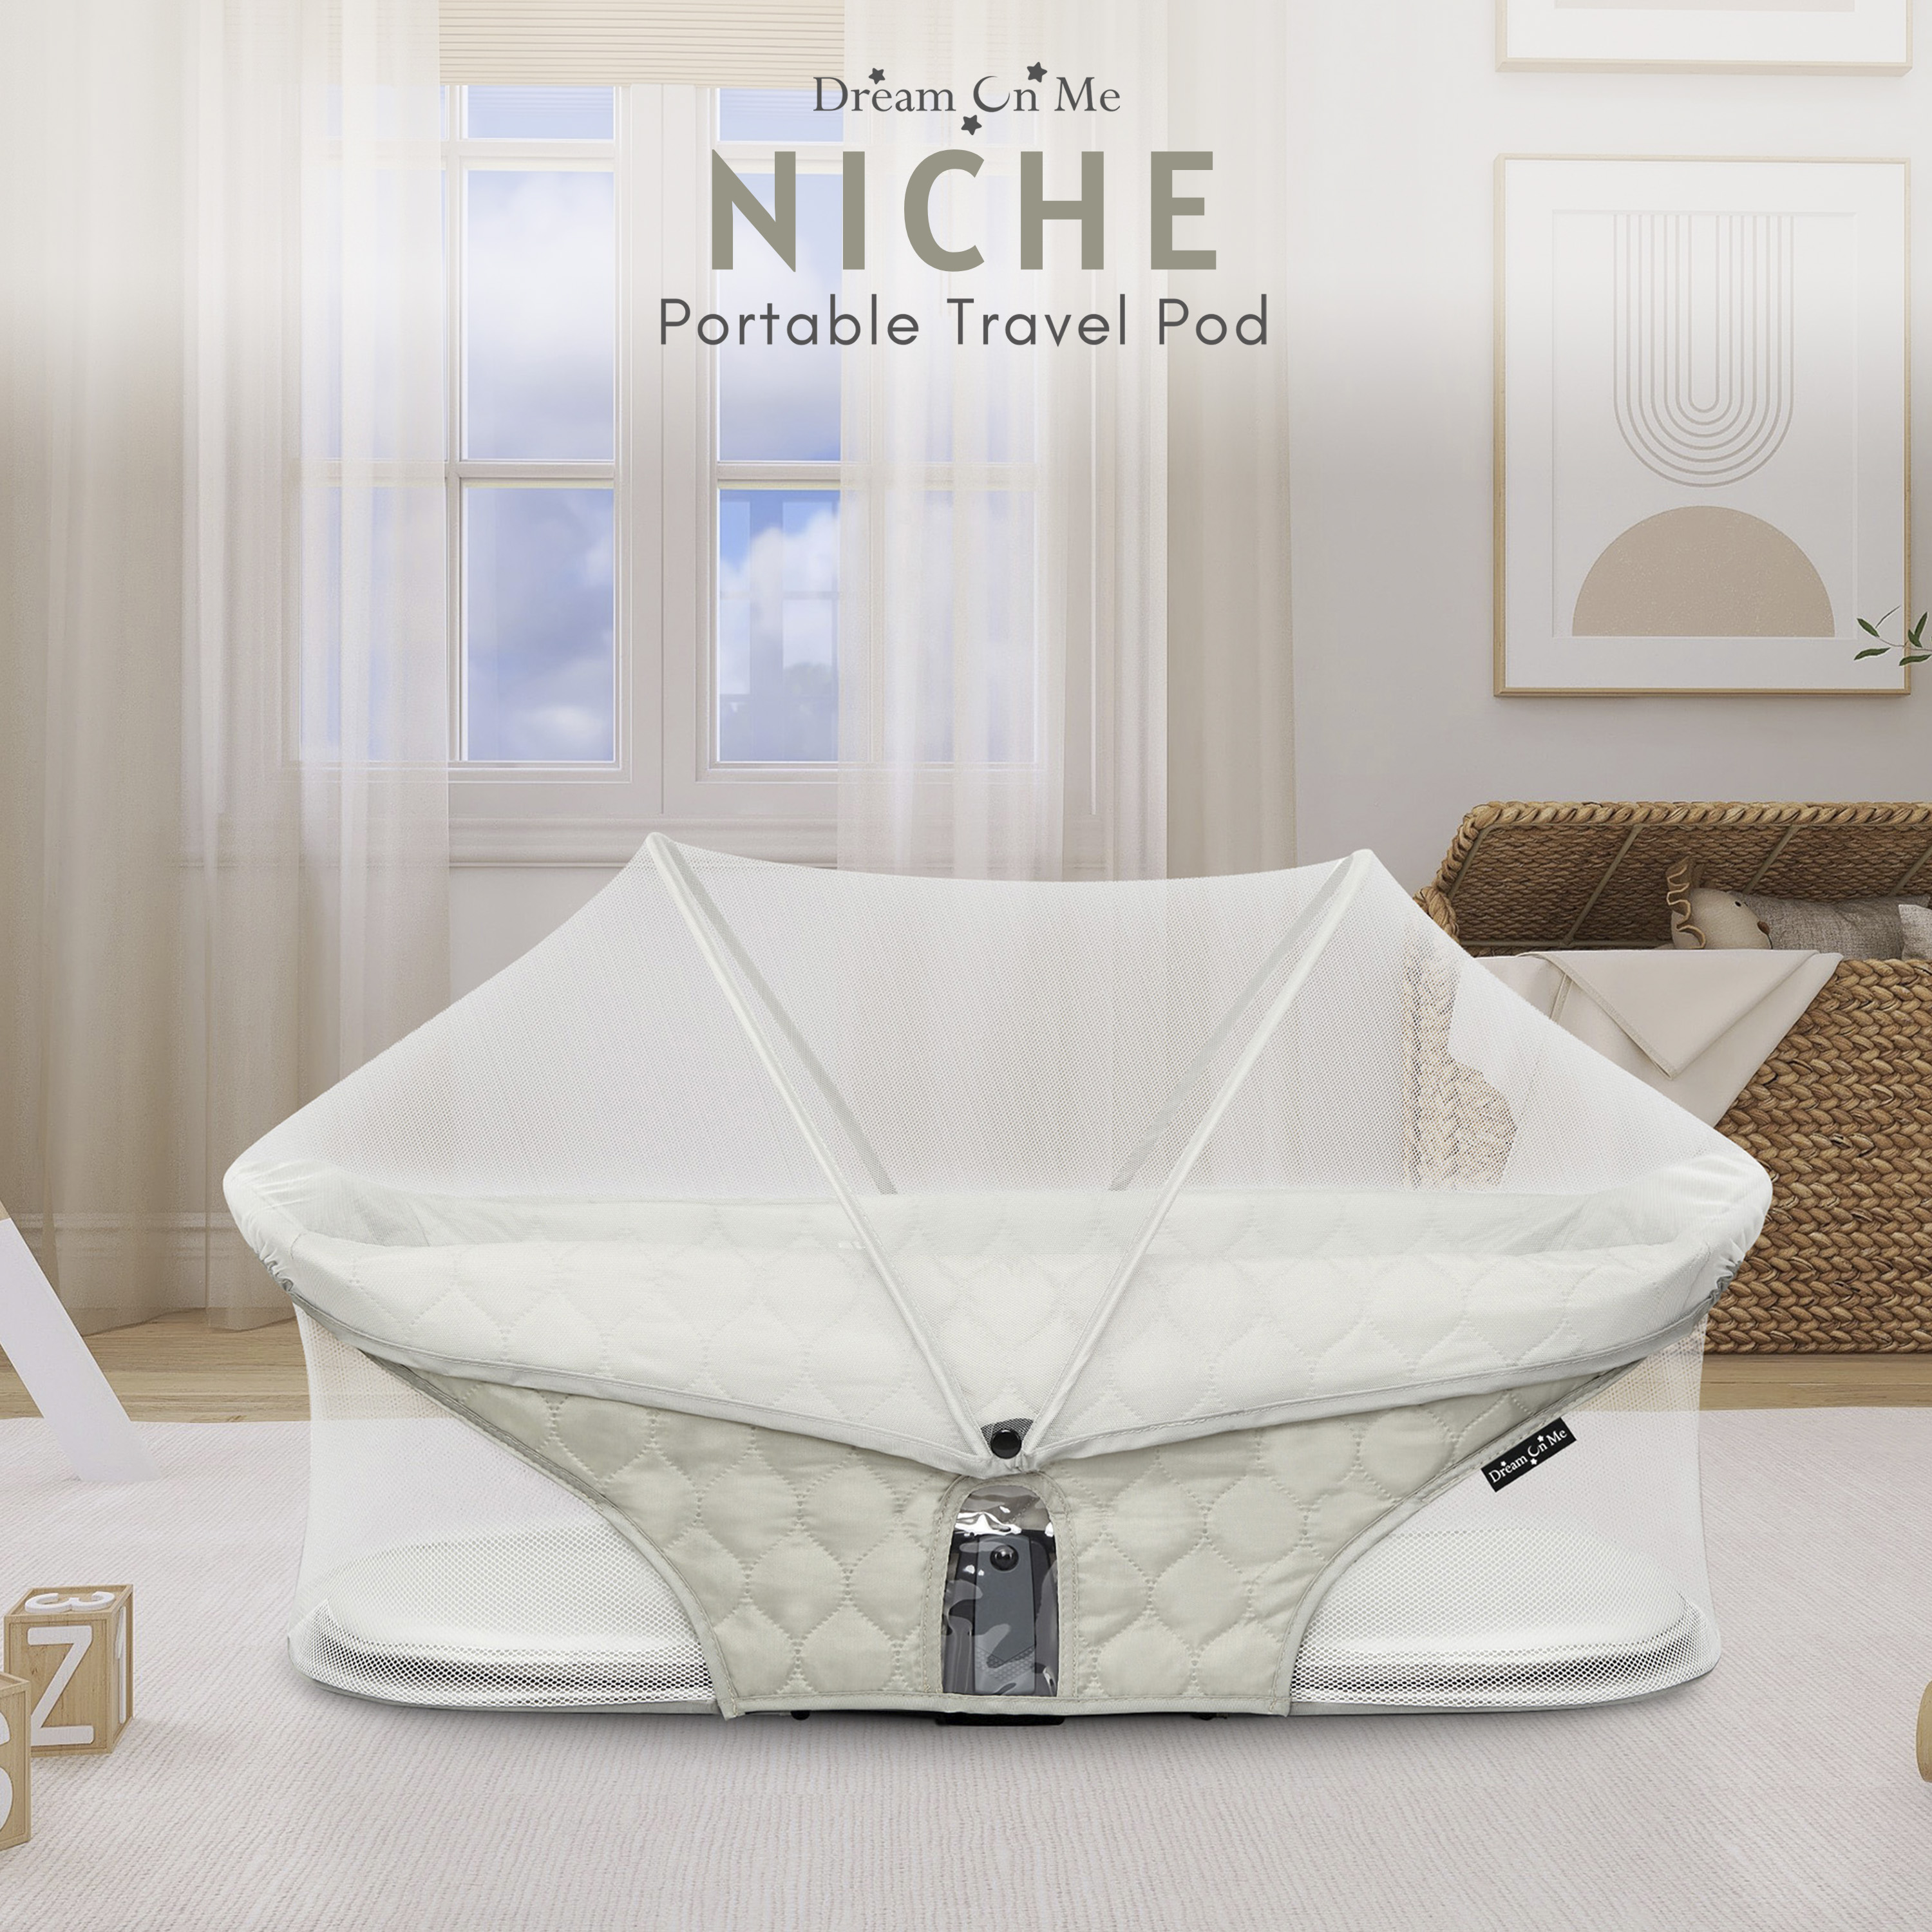 Dream On Me Niche On The Go Portable Travel Pod for Babies in Grey, Lightweight and Easy to Fold - image 4 of 12